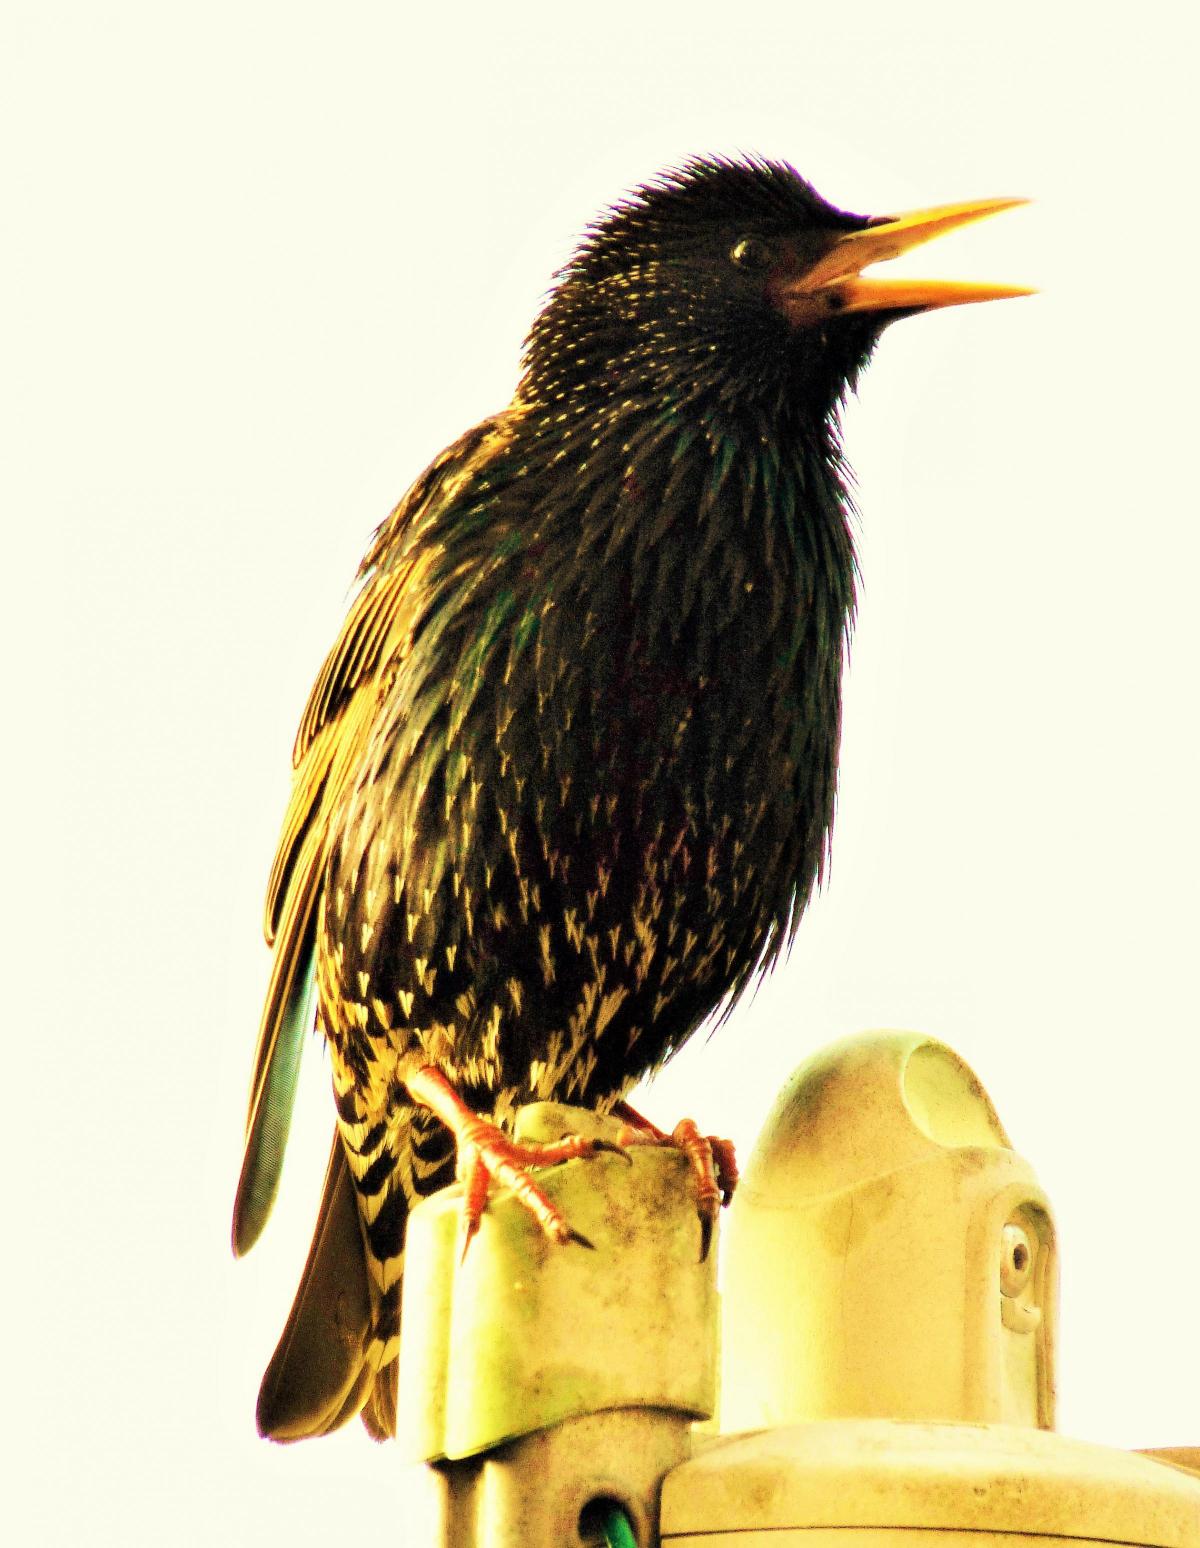 A happy starling sings. Sent in by Hayley Elizabeth Young